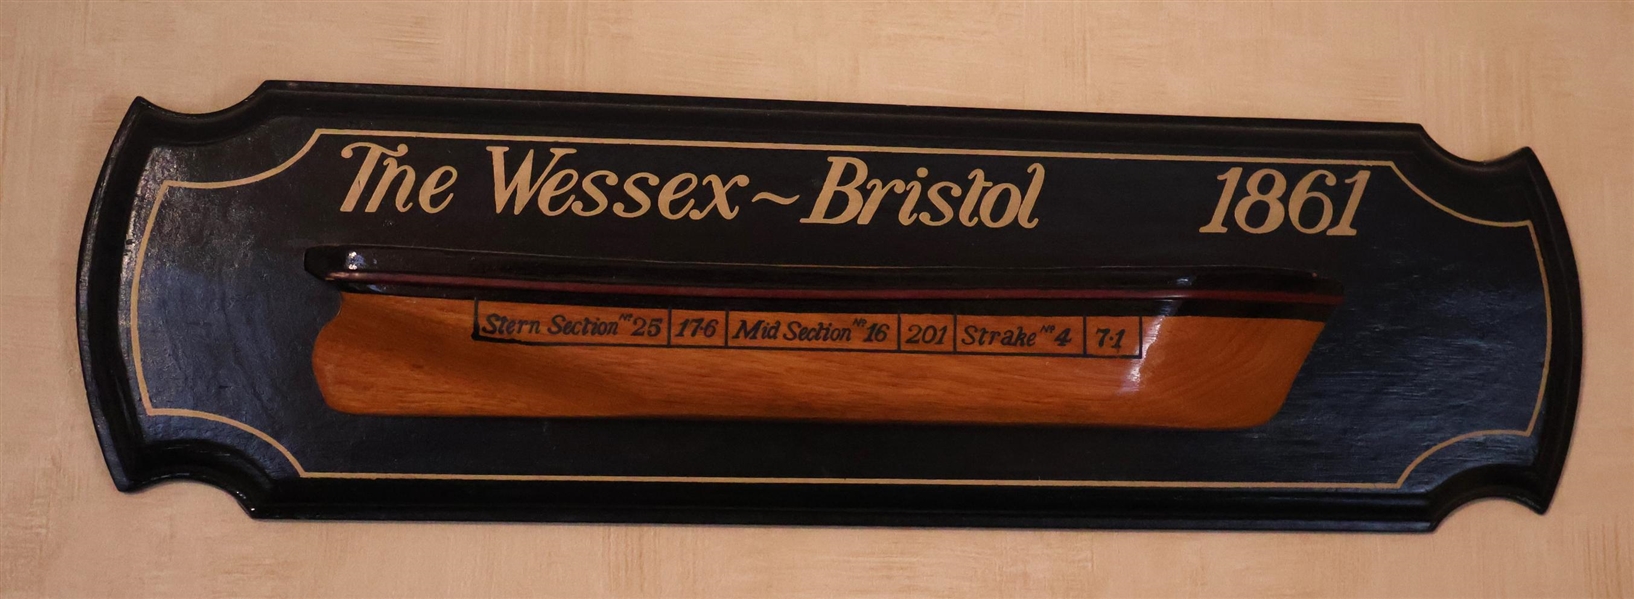 "The Wessex - Bristol 1861" Wood Plaque with Three Dimensional Canoe - Measures 20" by 6"